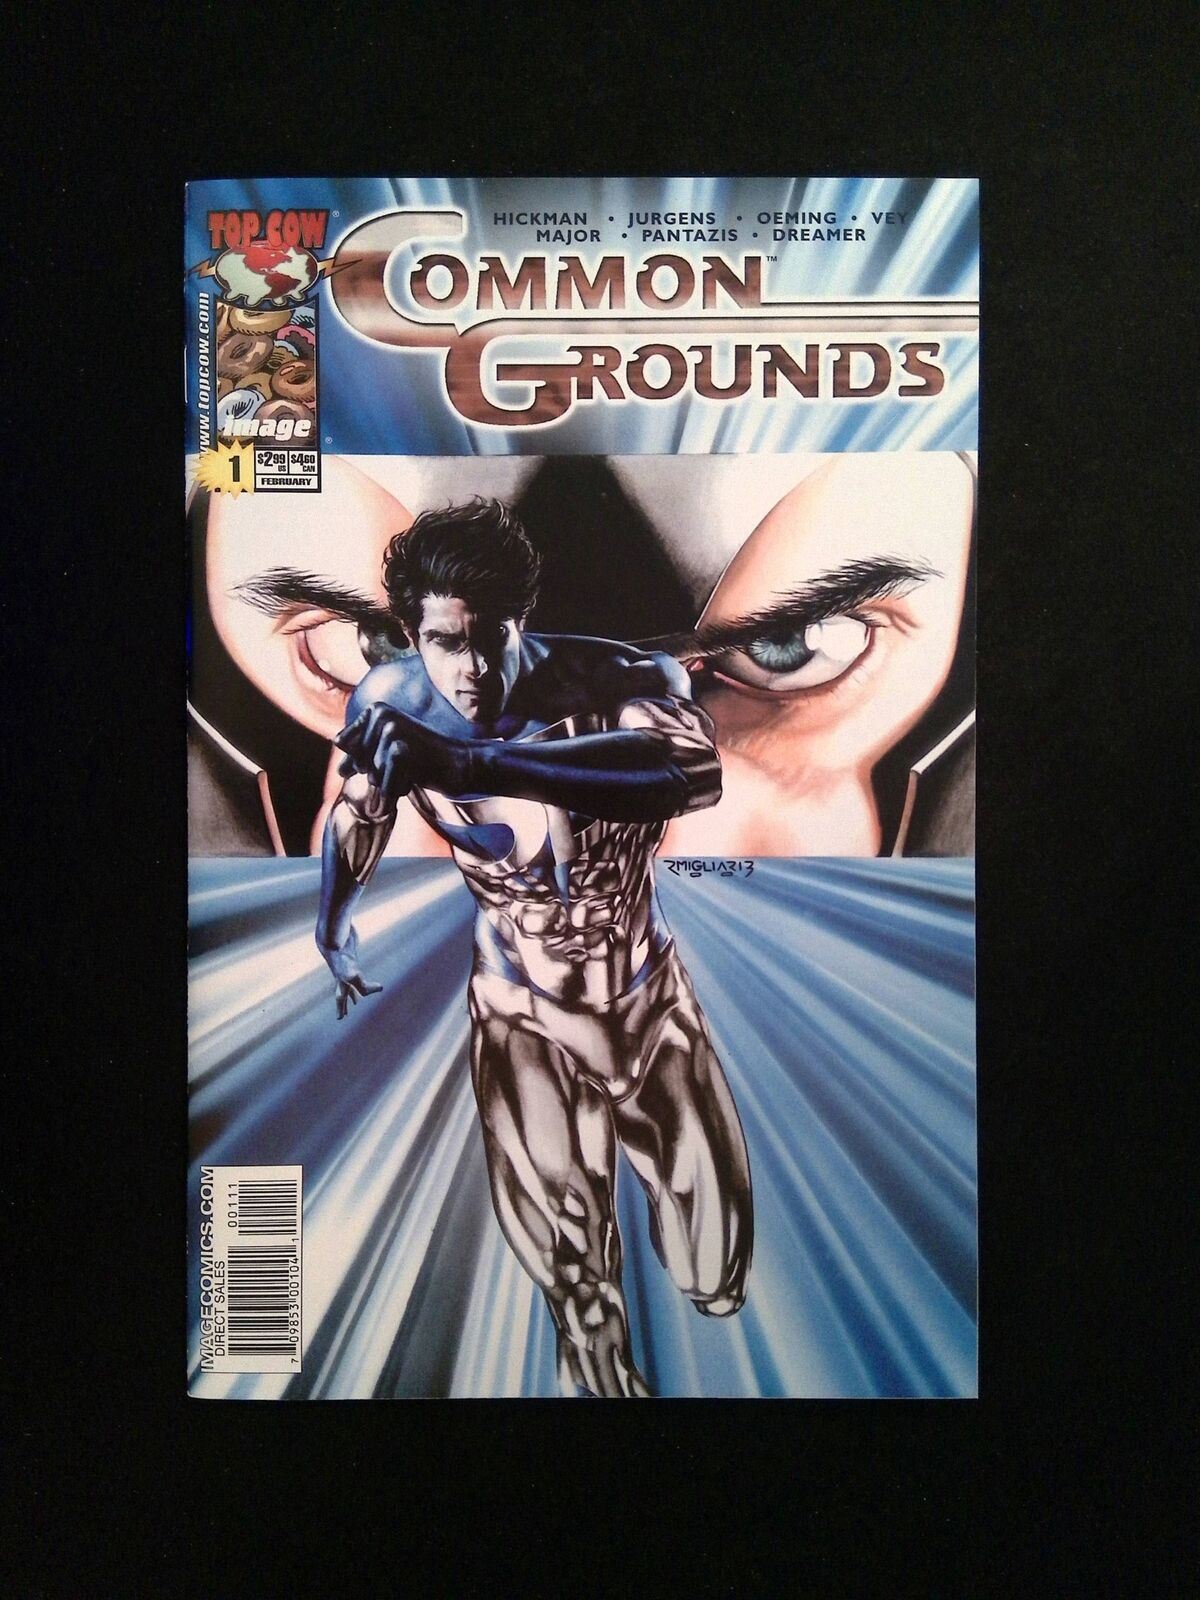 Common Gorunds #1B  TOP COW Comics 2004 NM  VARIANT COVER